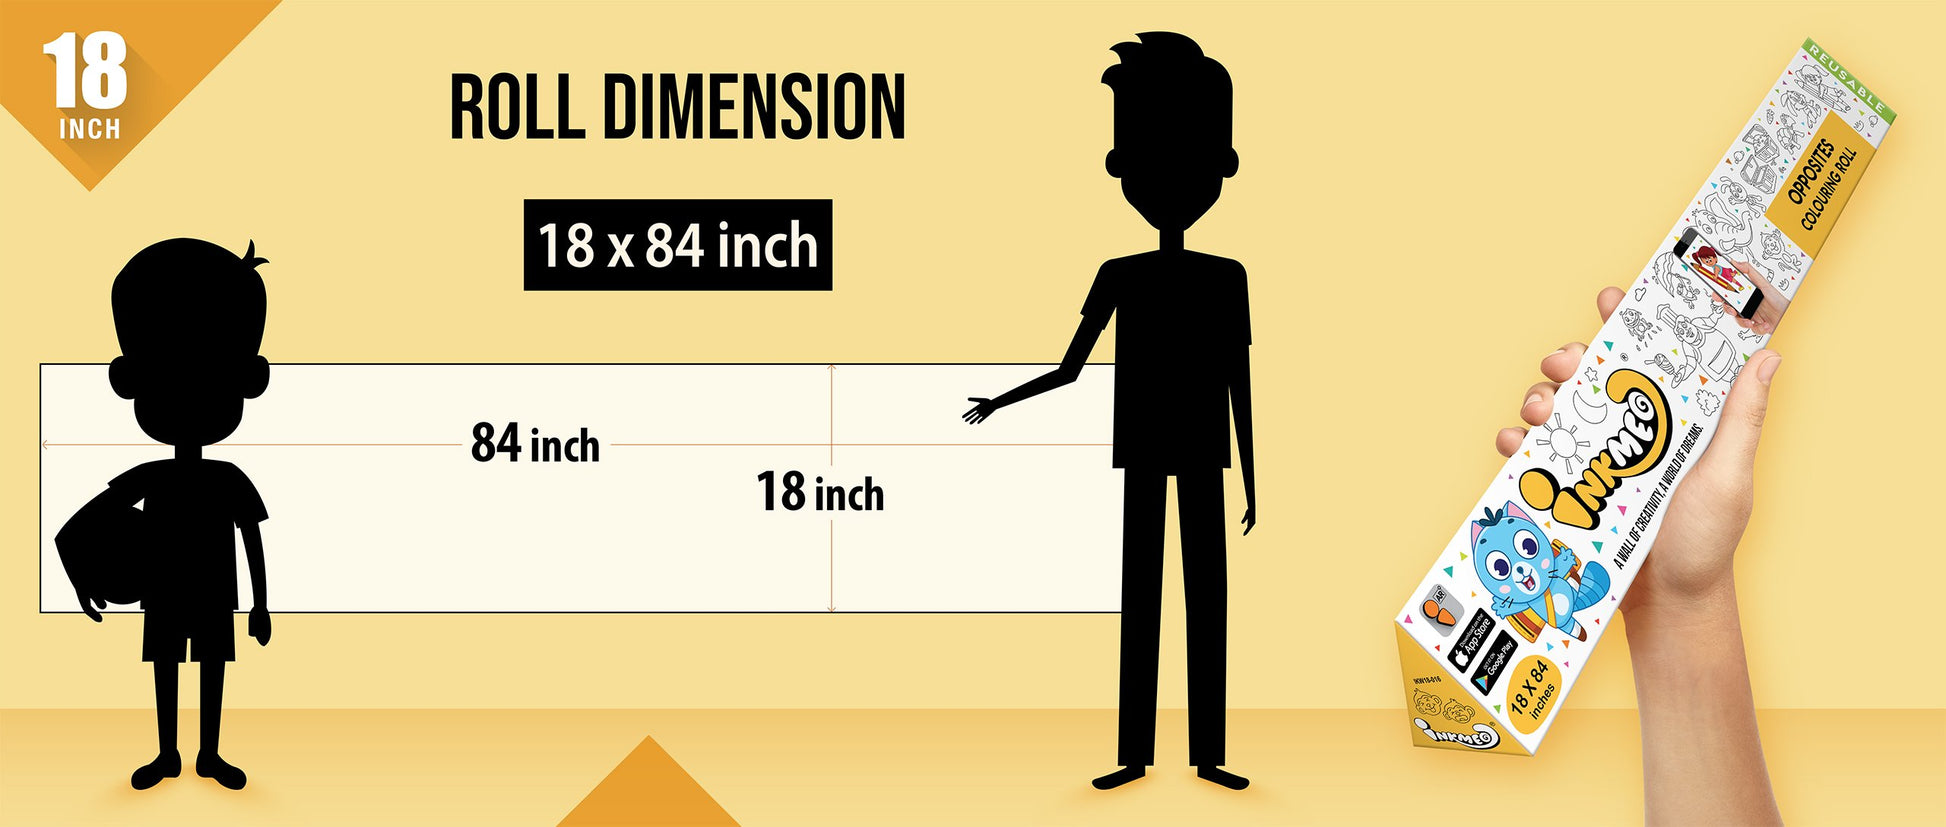 The image shows a yellowbackground with a ruler indicating child and adult height on an 18*84 inch paper roll dimension.